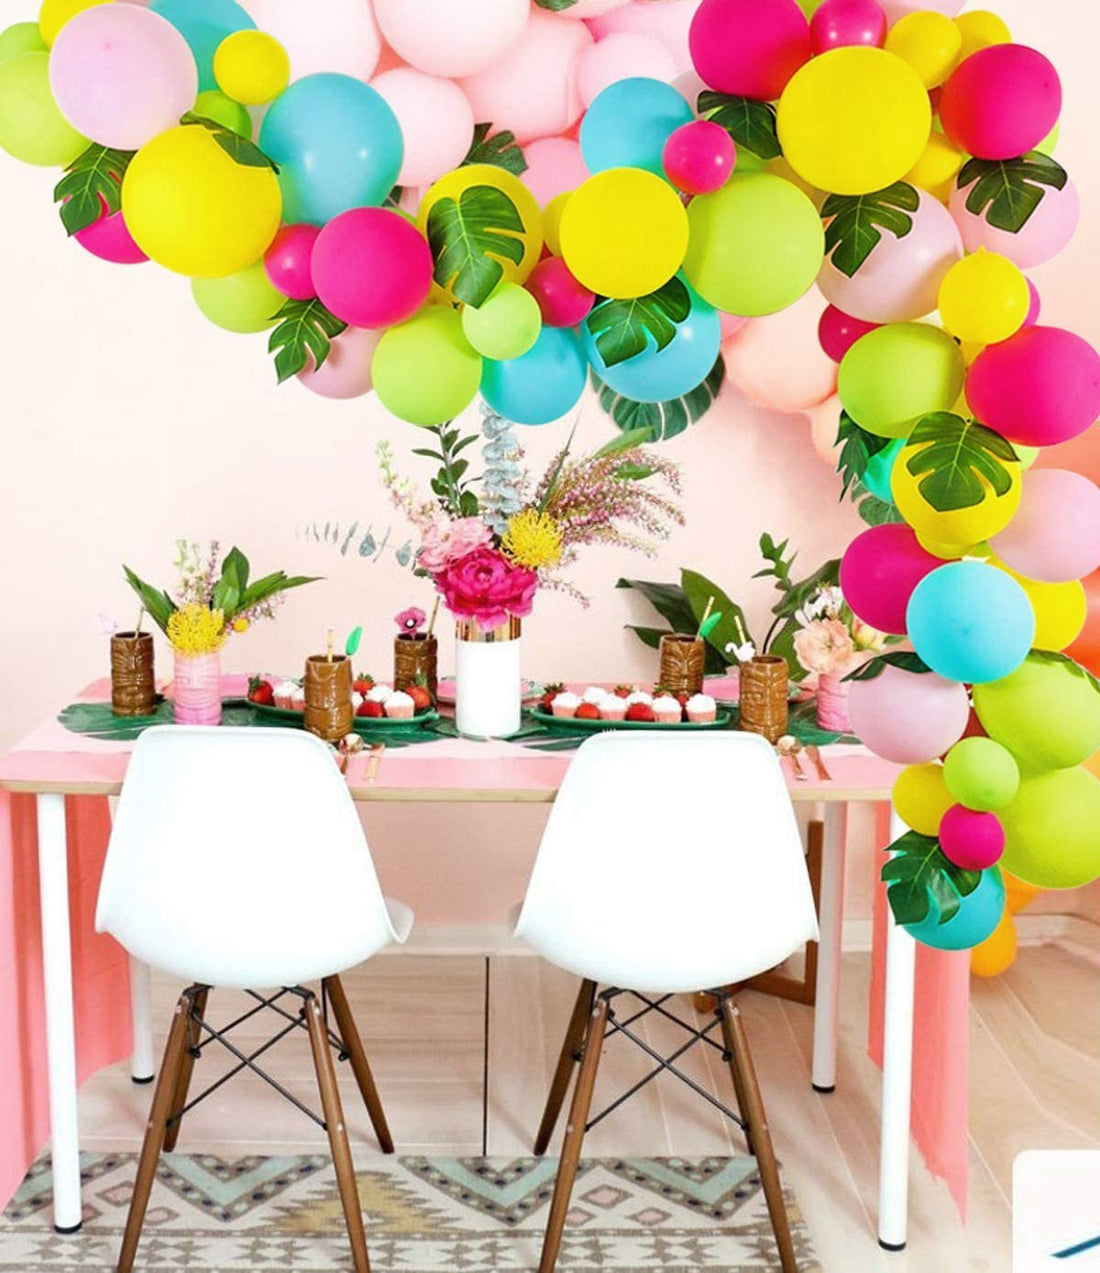 Top 15 Party Themes For 2021 - Ellie's Party Supply